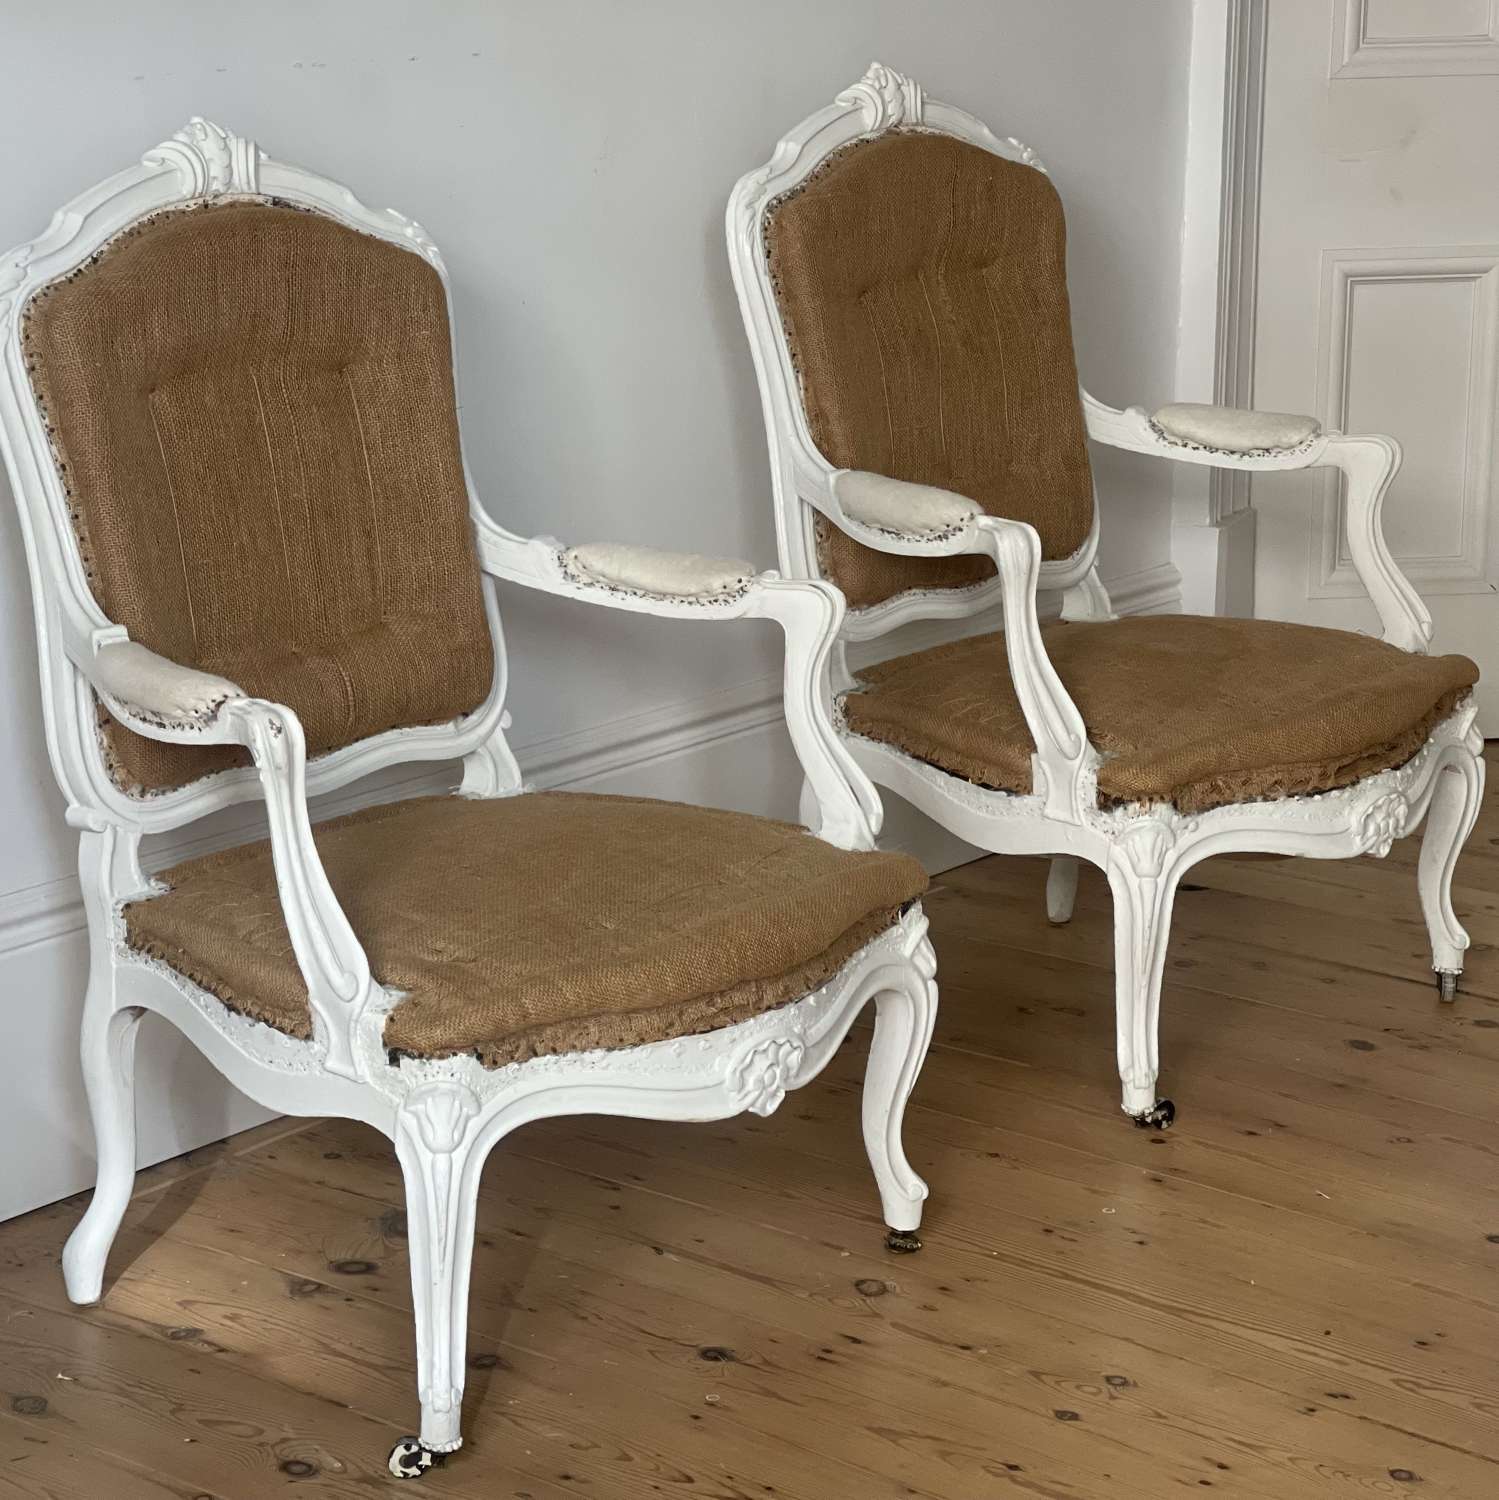 Pair of 19th century French Louis XV chairs